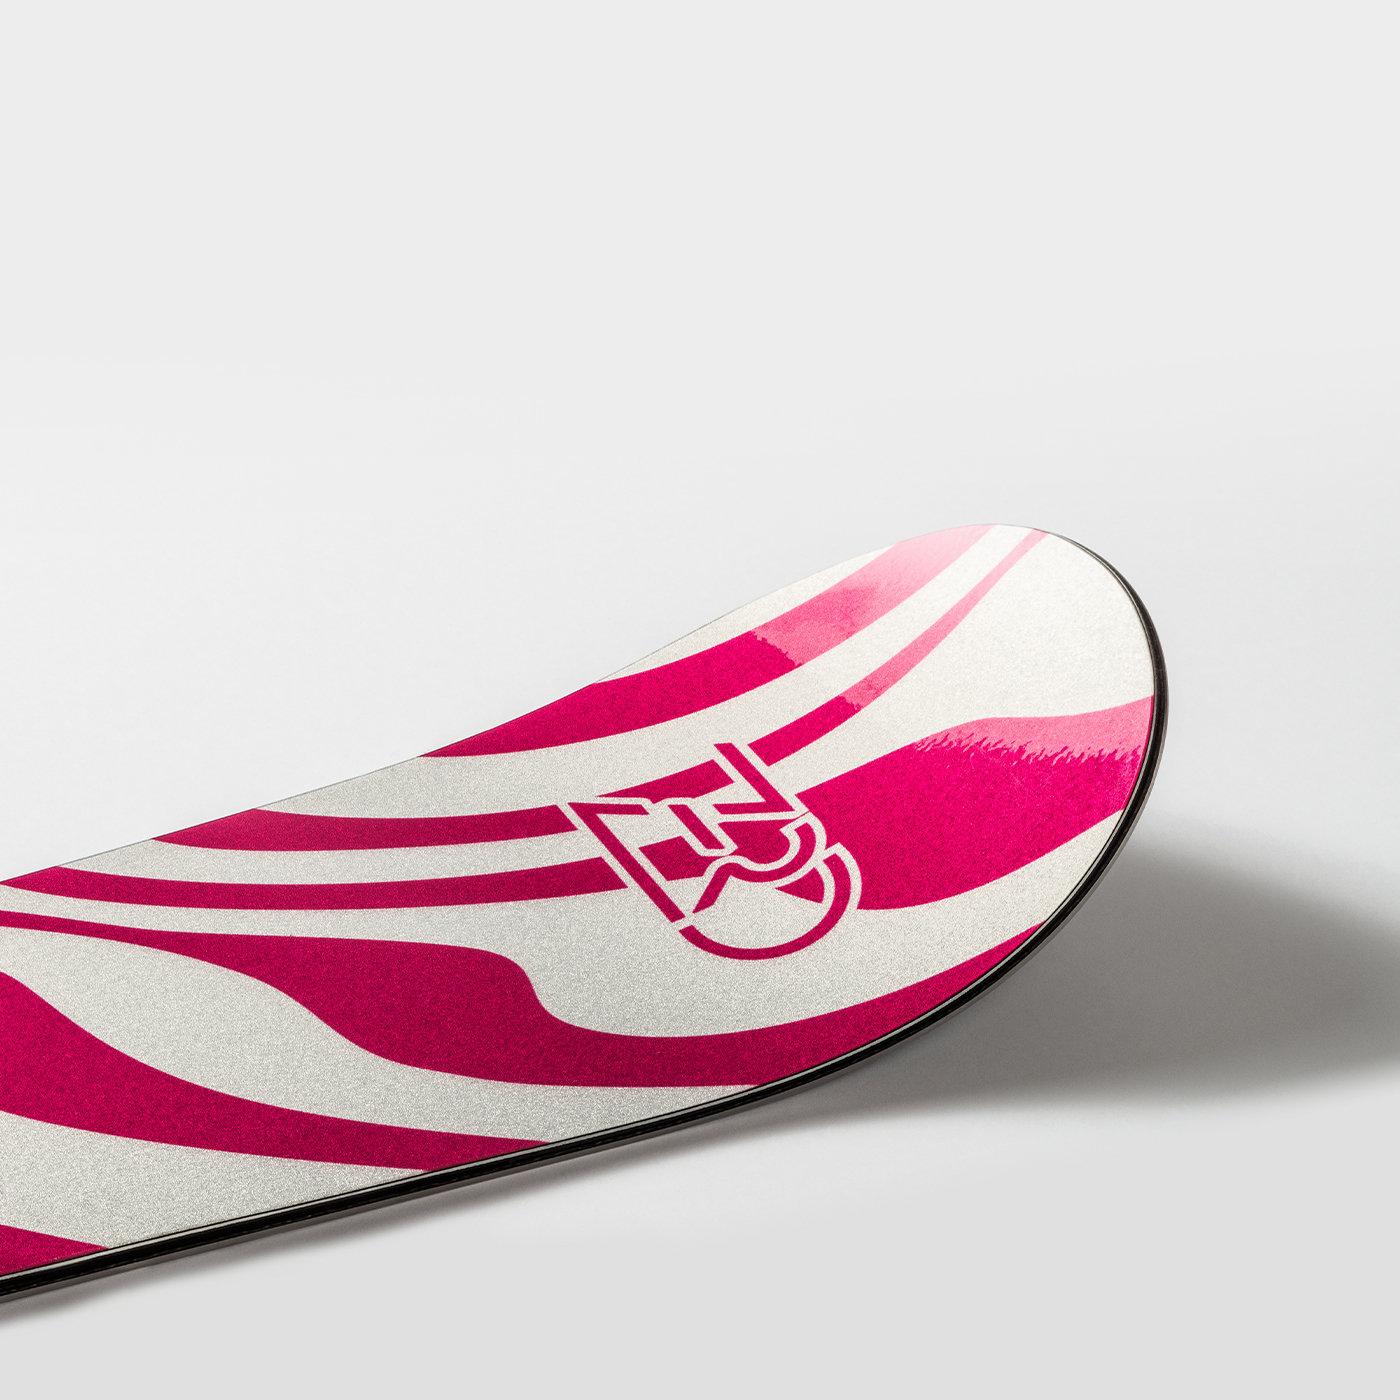 Designed for women, the Vesper skis sport a lively white and pink wavy pattern decorated by hand using metallic paints. The combination of lightwood core, Titanal, and fiberglass guarantees easy and soft skiing, while the side cuts offer flexibility